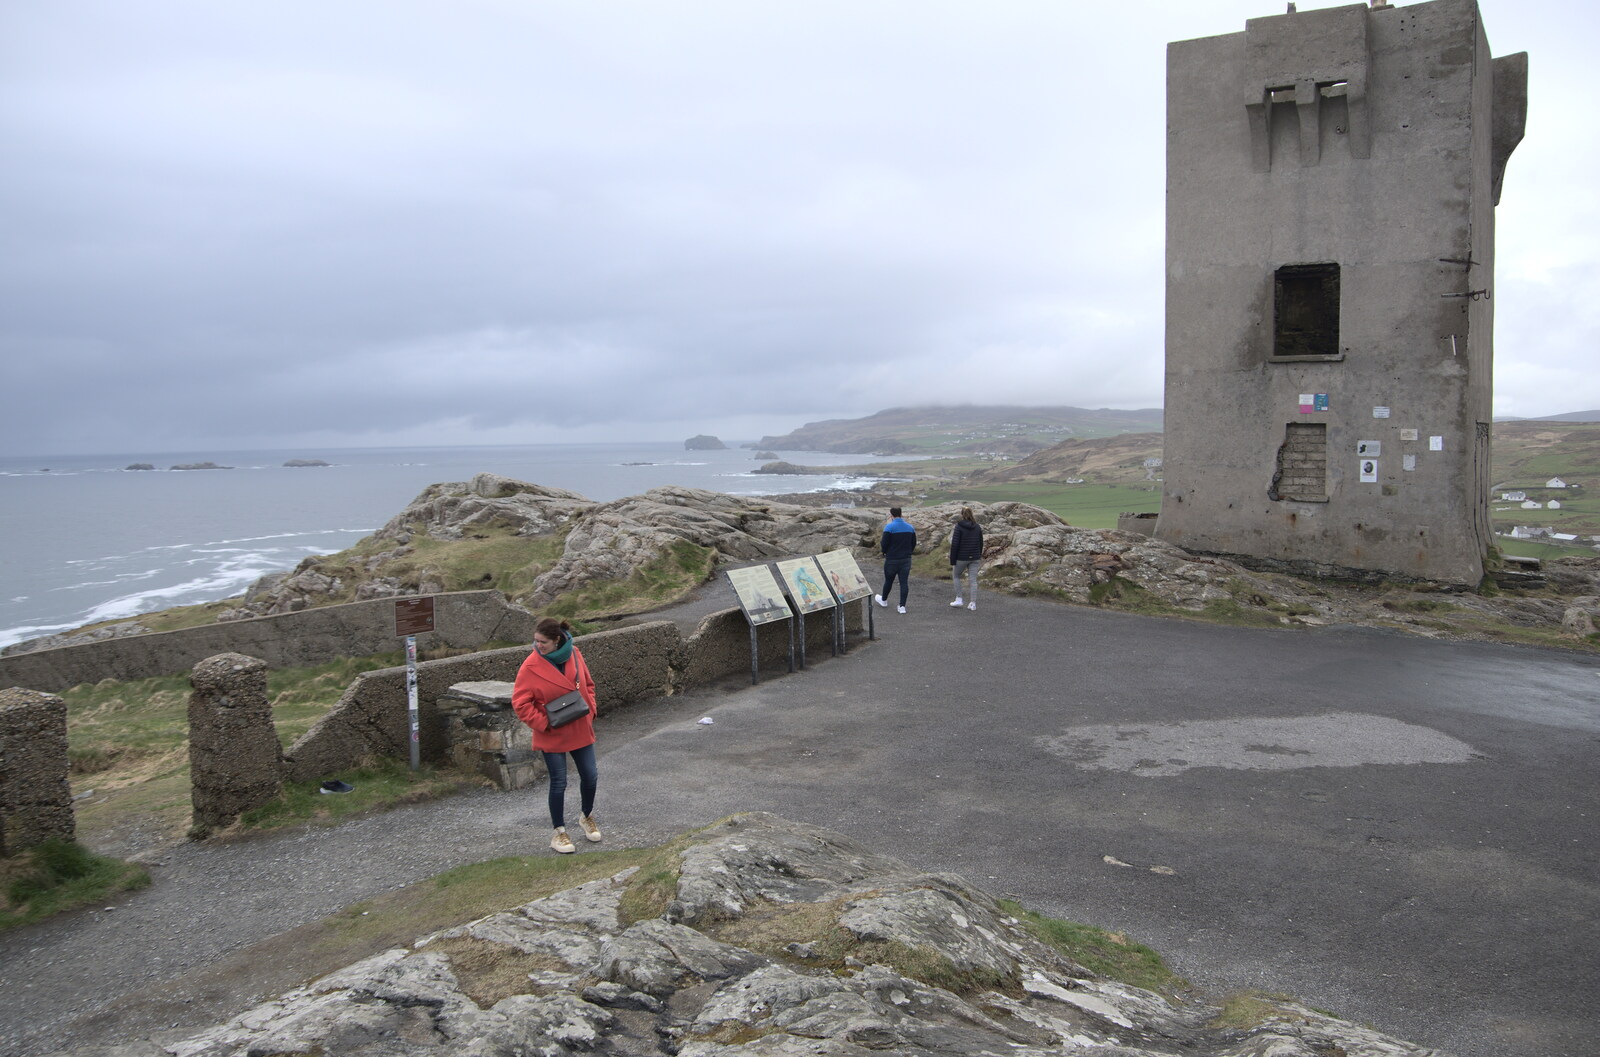 Greencastle, Doagh and Malin Head, County Donegal, Ireland - 19th April 2022: Isobel roams around at Malin Head